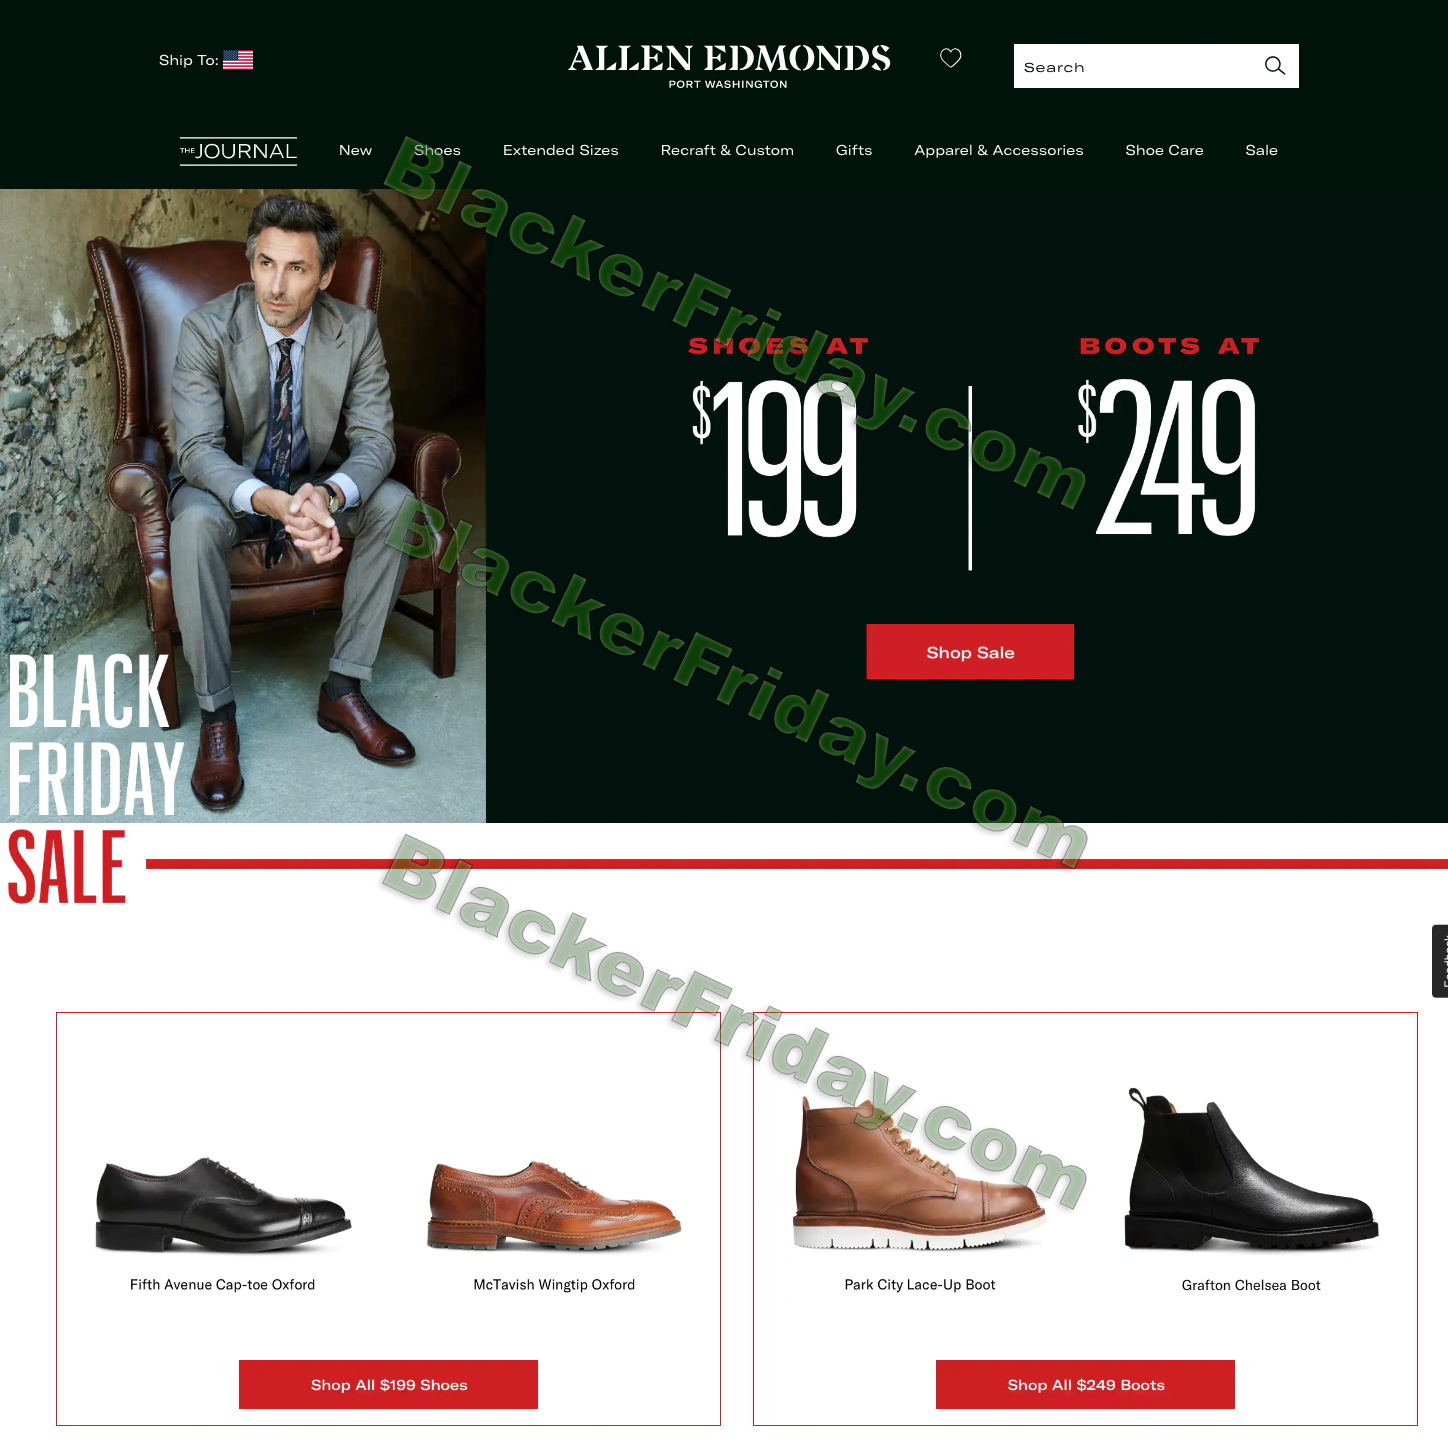 What to expect at Allen Edmonds' Black Friday 2023 Sale - Blacker Friday